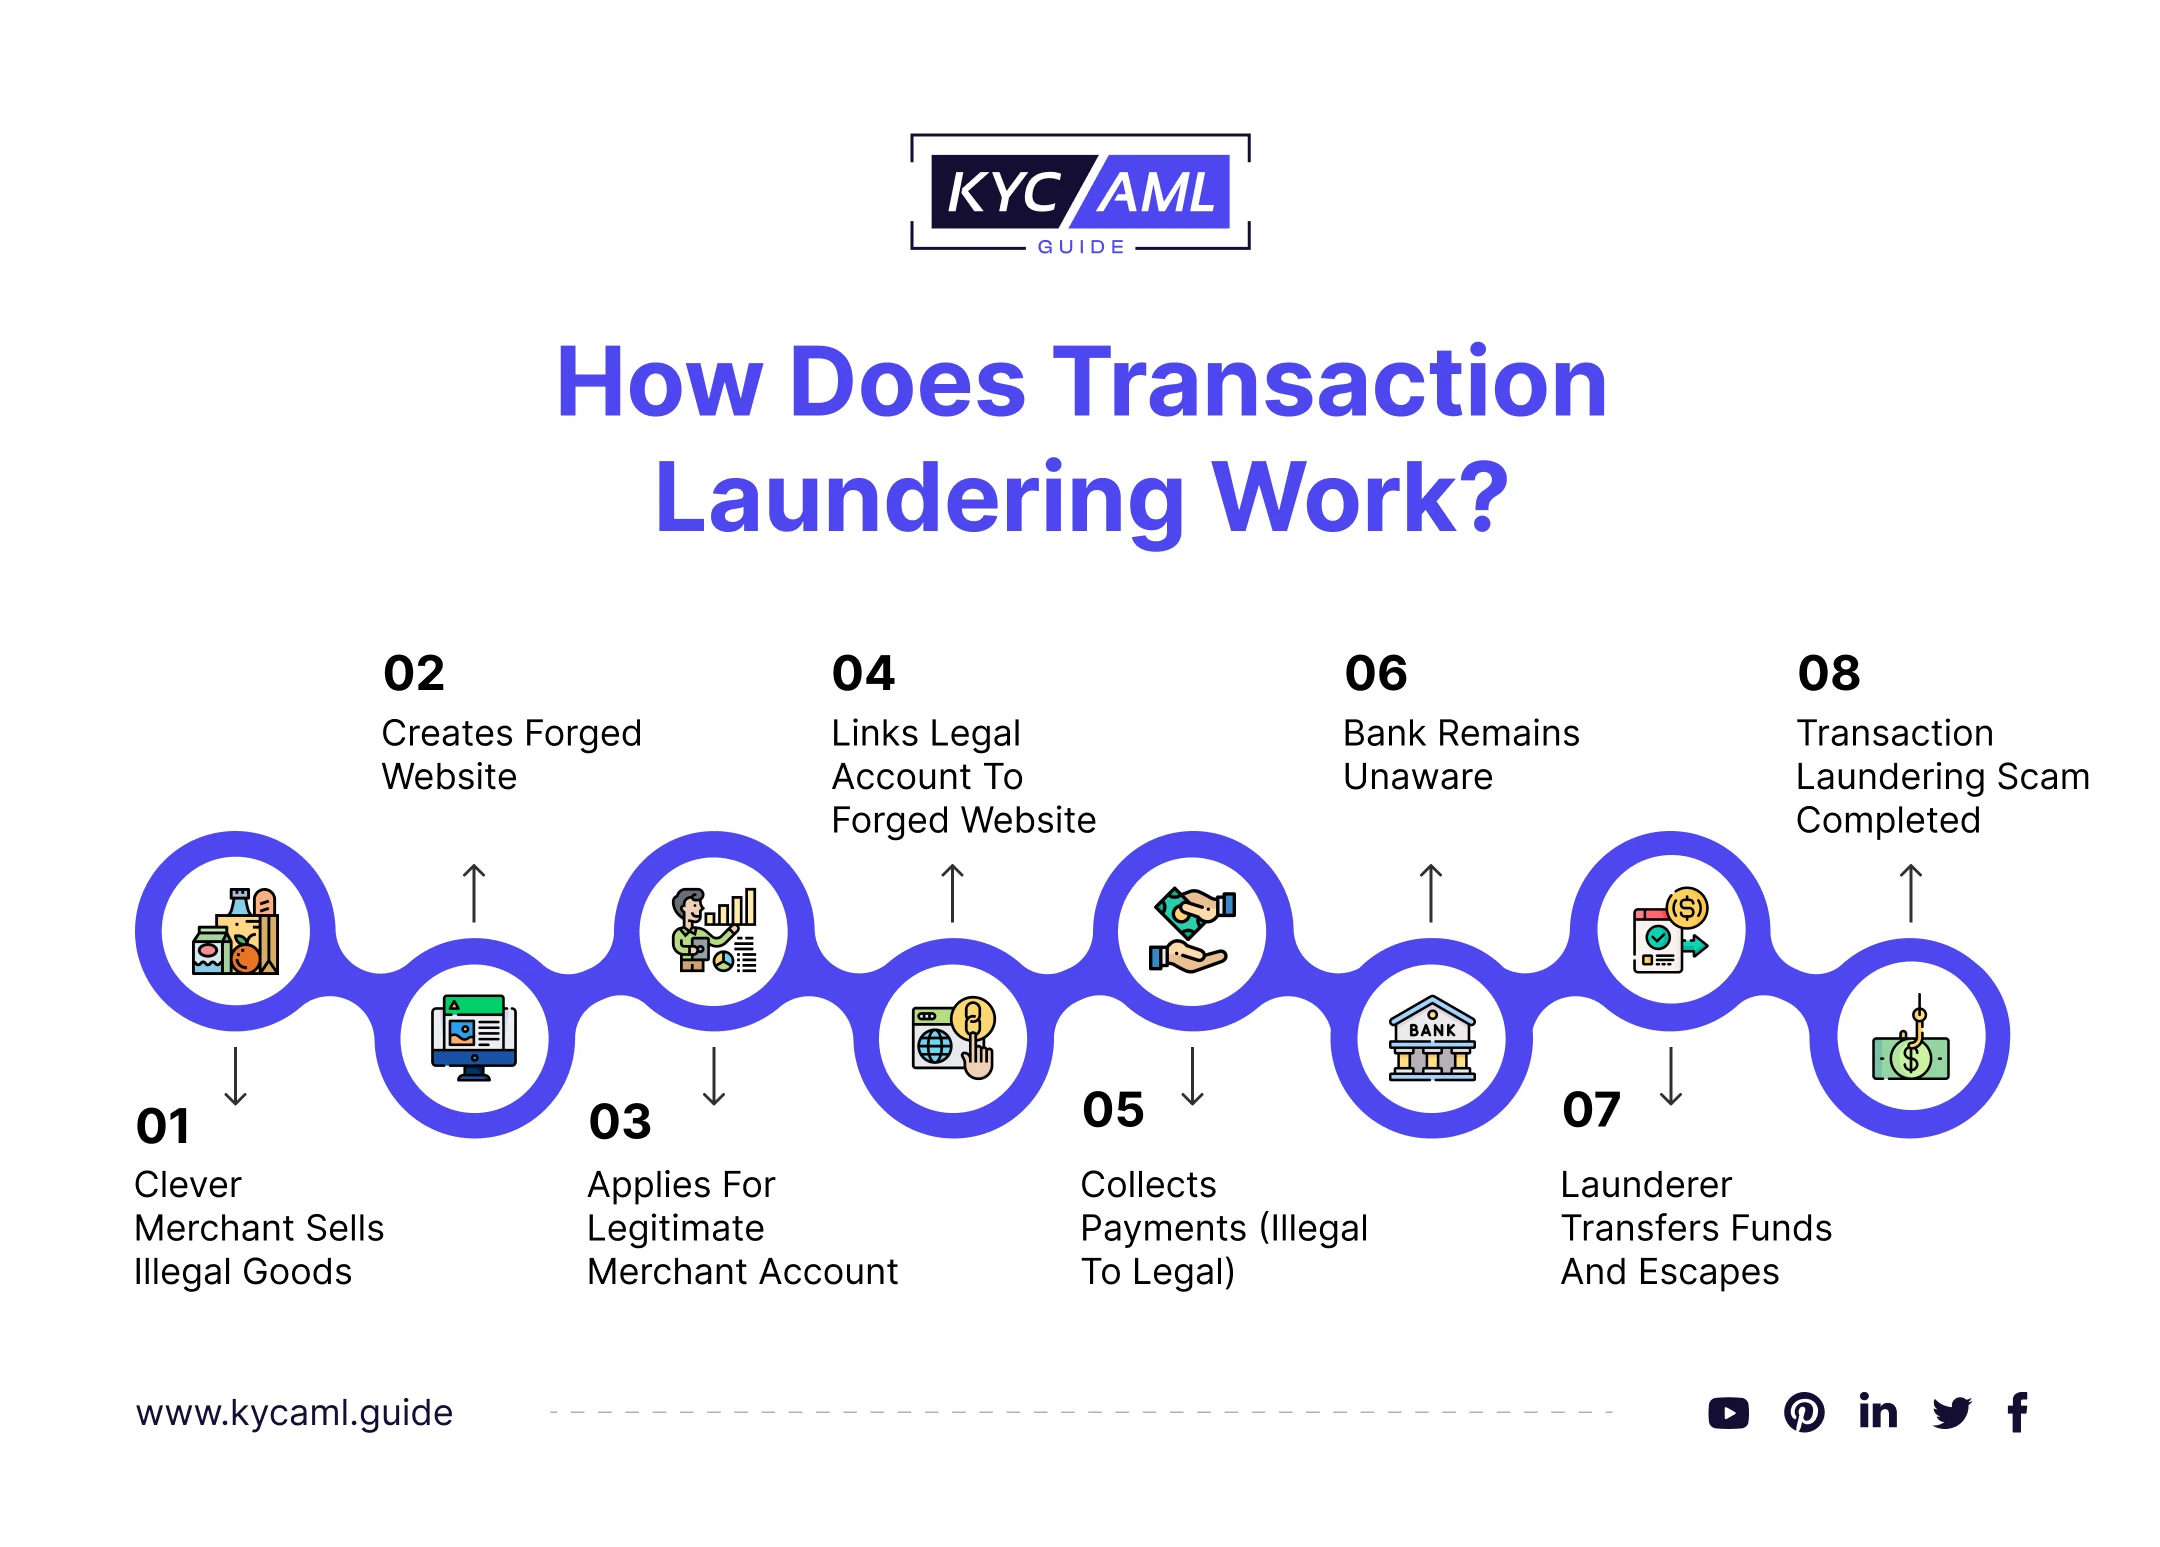 How Does Transaction Laundering Work